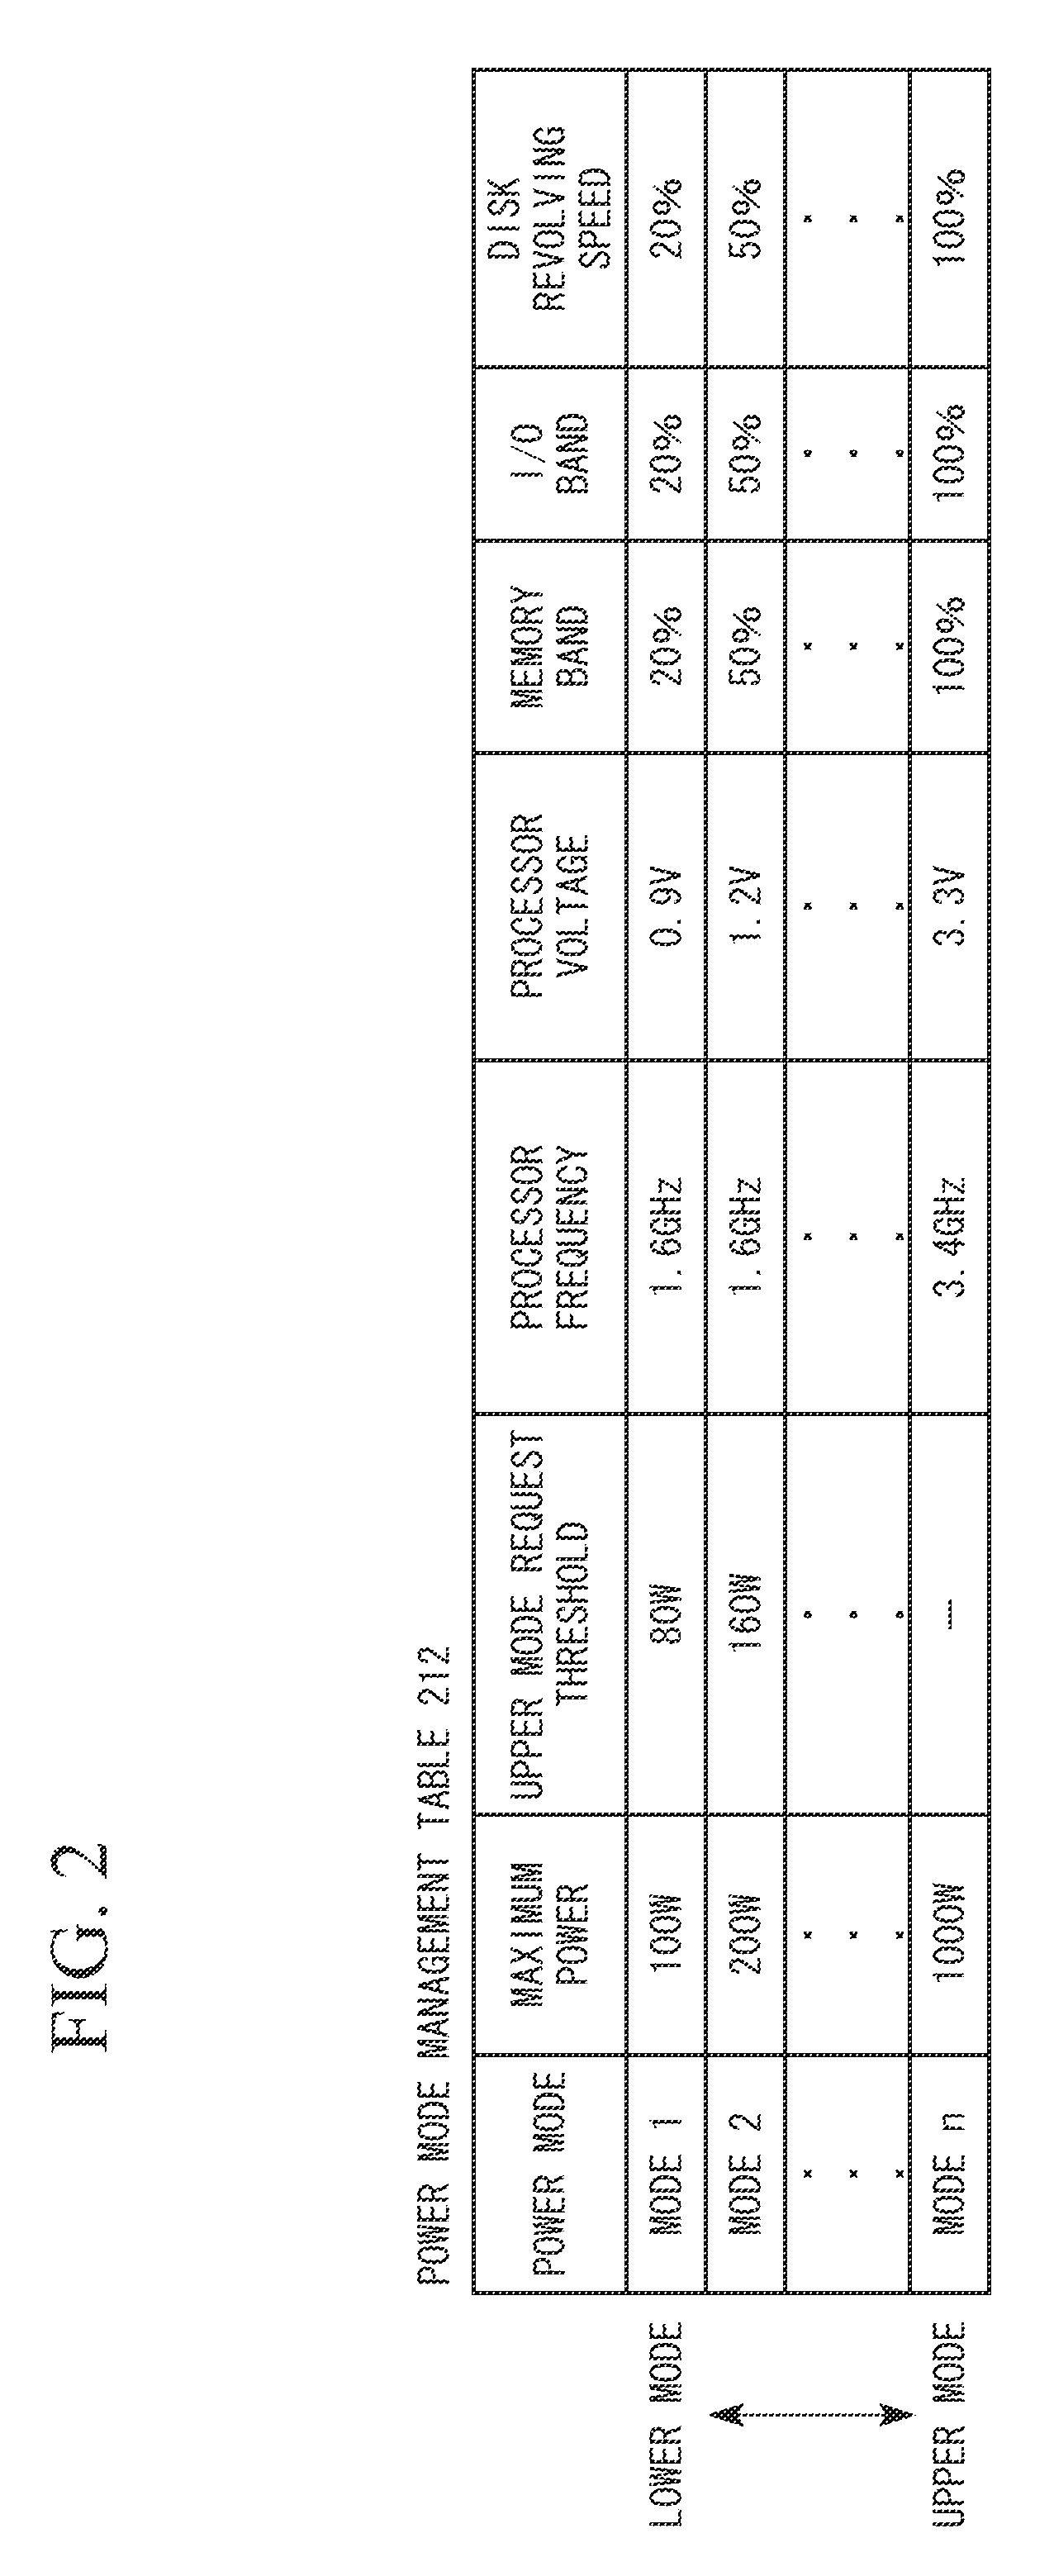 Power distribution system and method thereof in which redundant power is collected only when power pool is below or equal to pool threshold